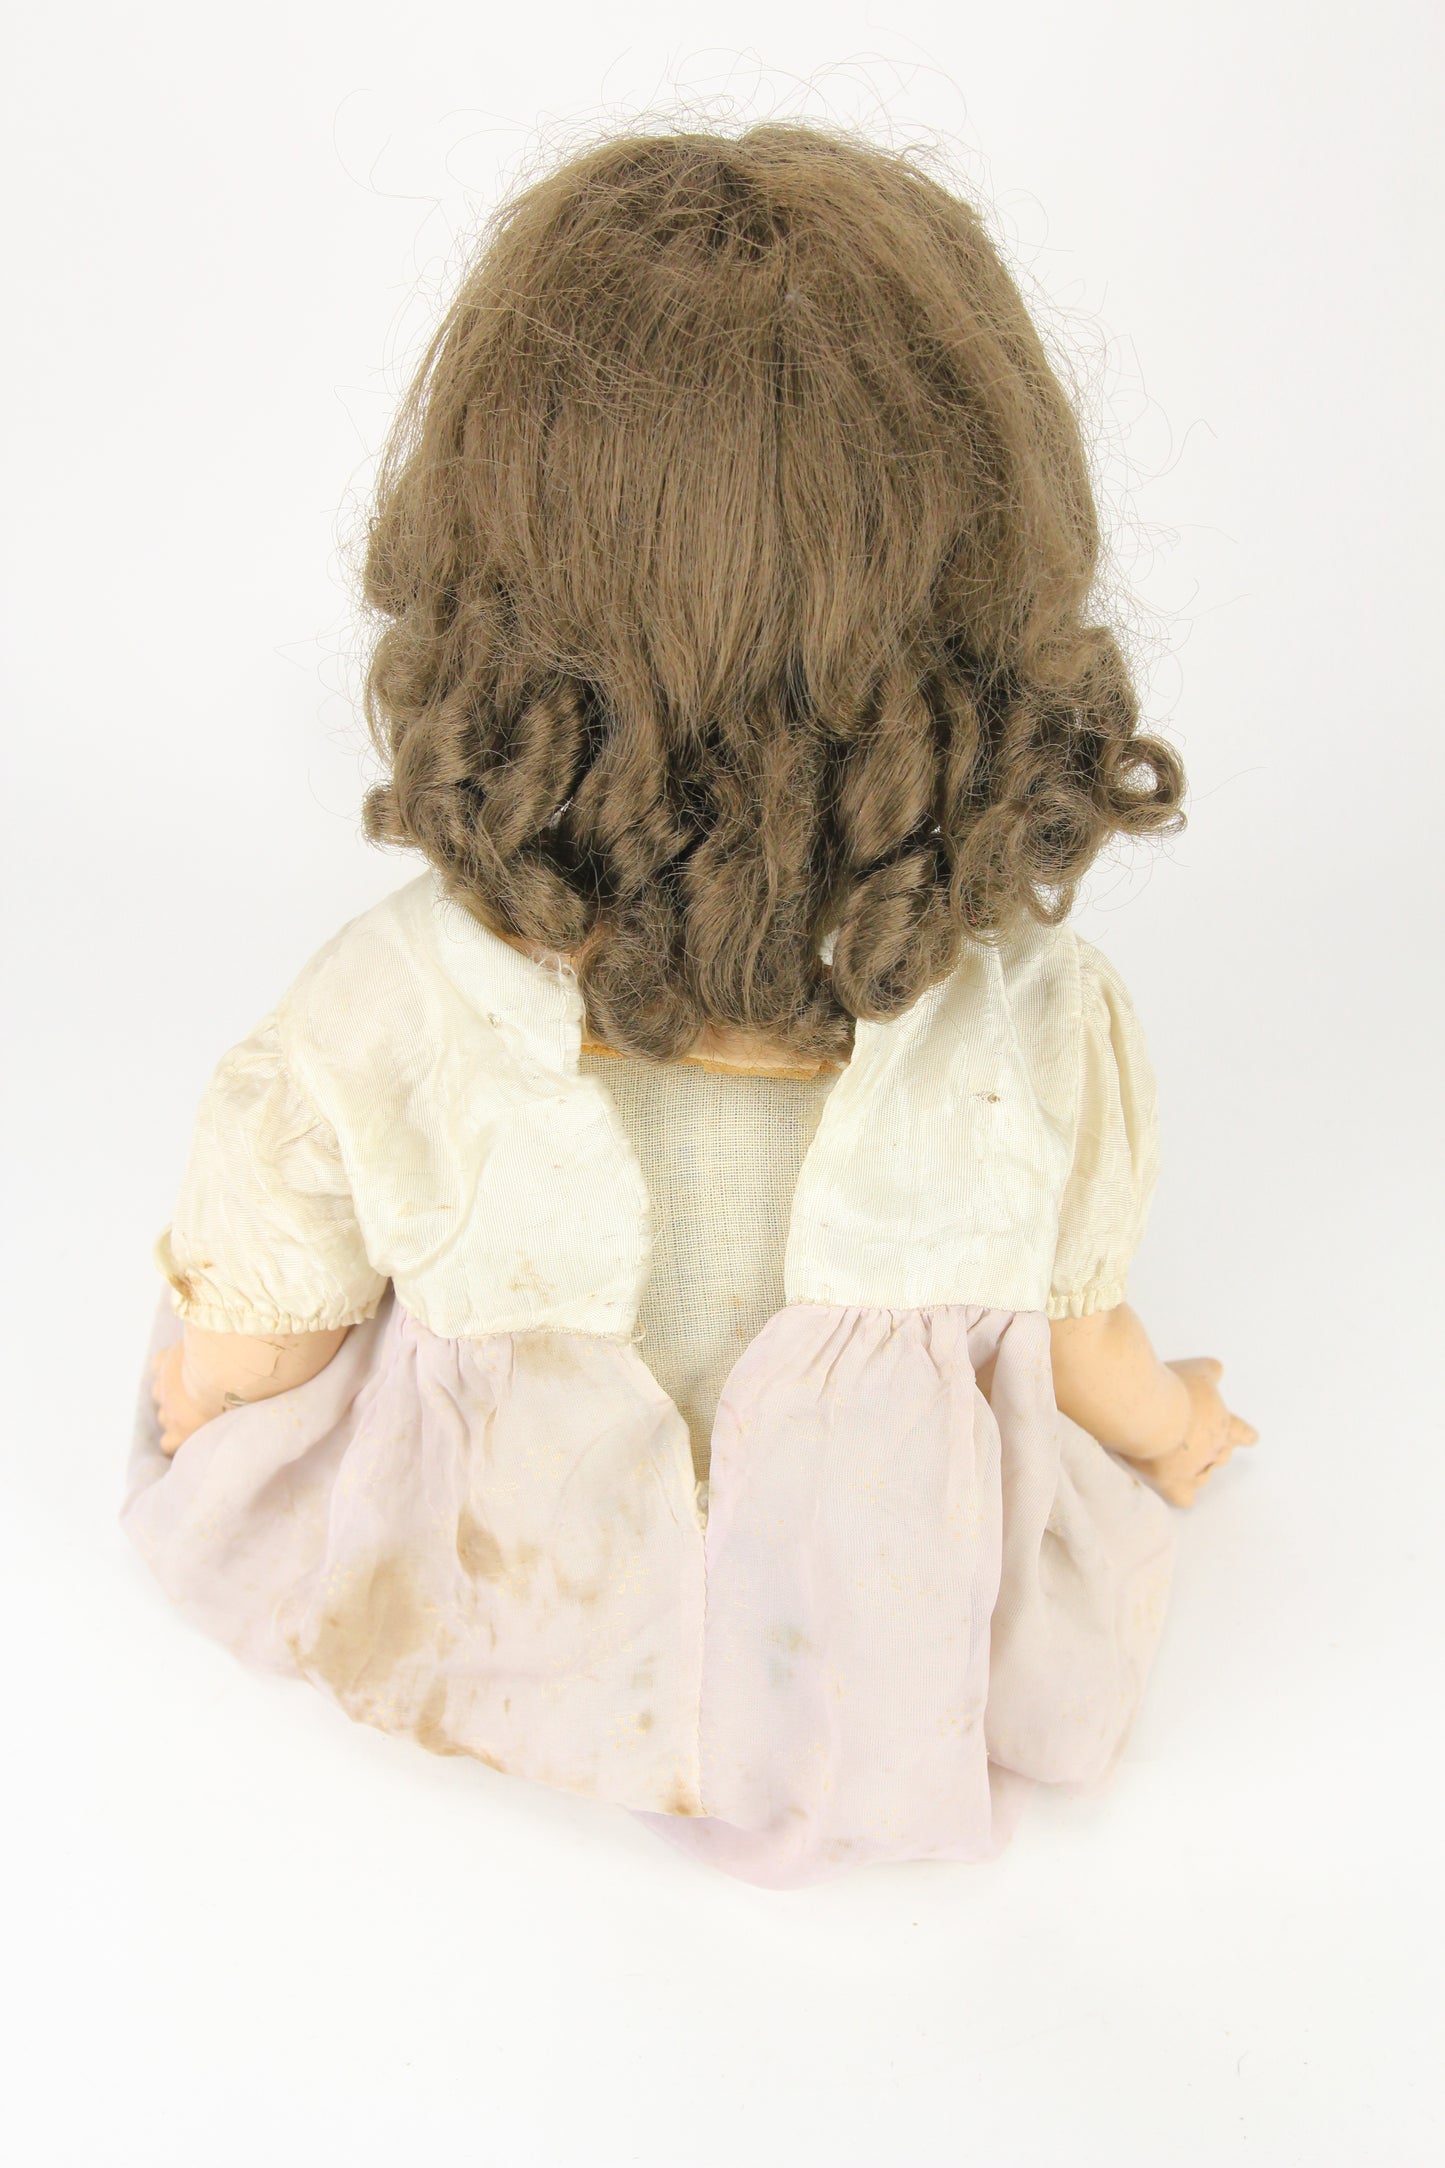 Composition Little Girl Baby Doll with Dress, Moving Blue Eyes, and Curly Brunette Wig, 23"